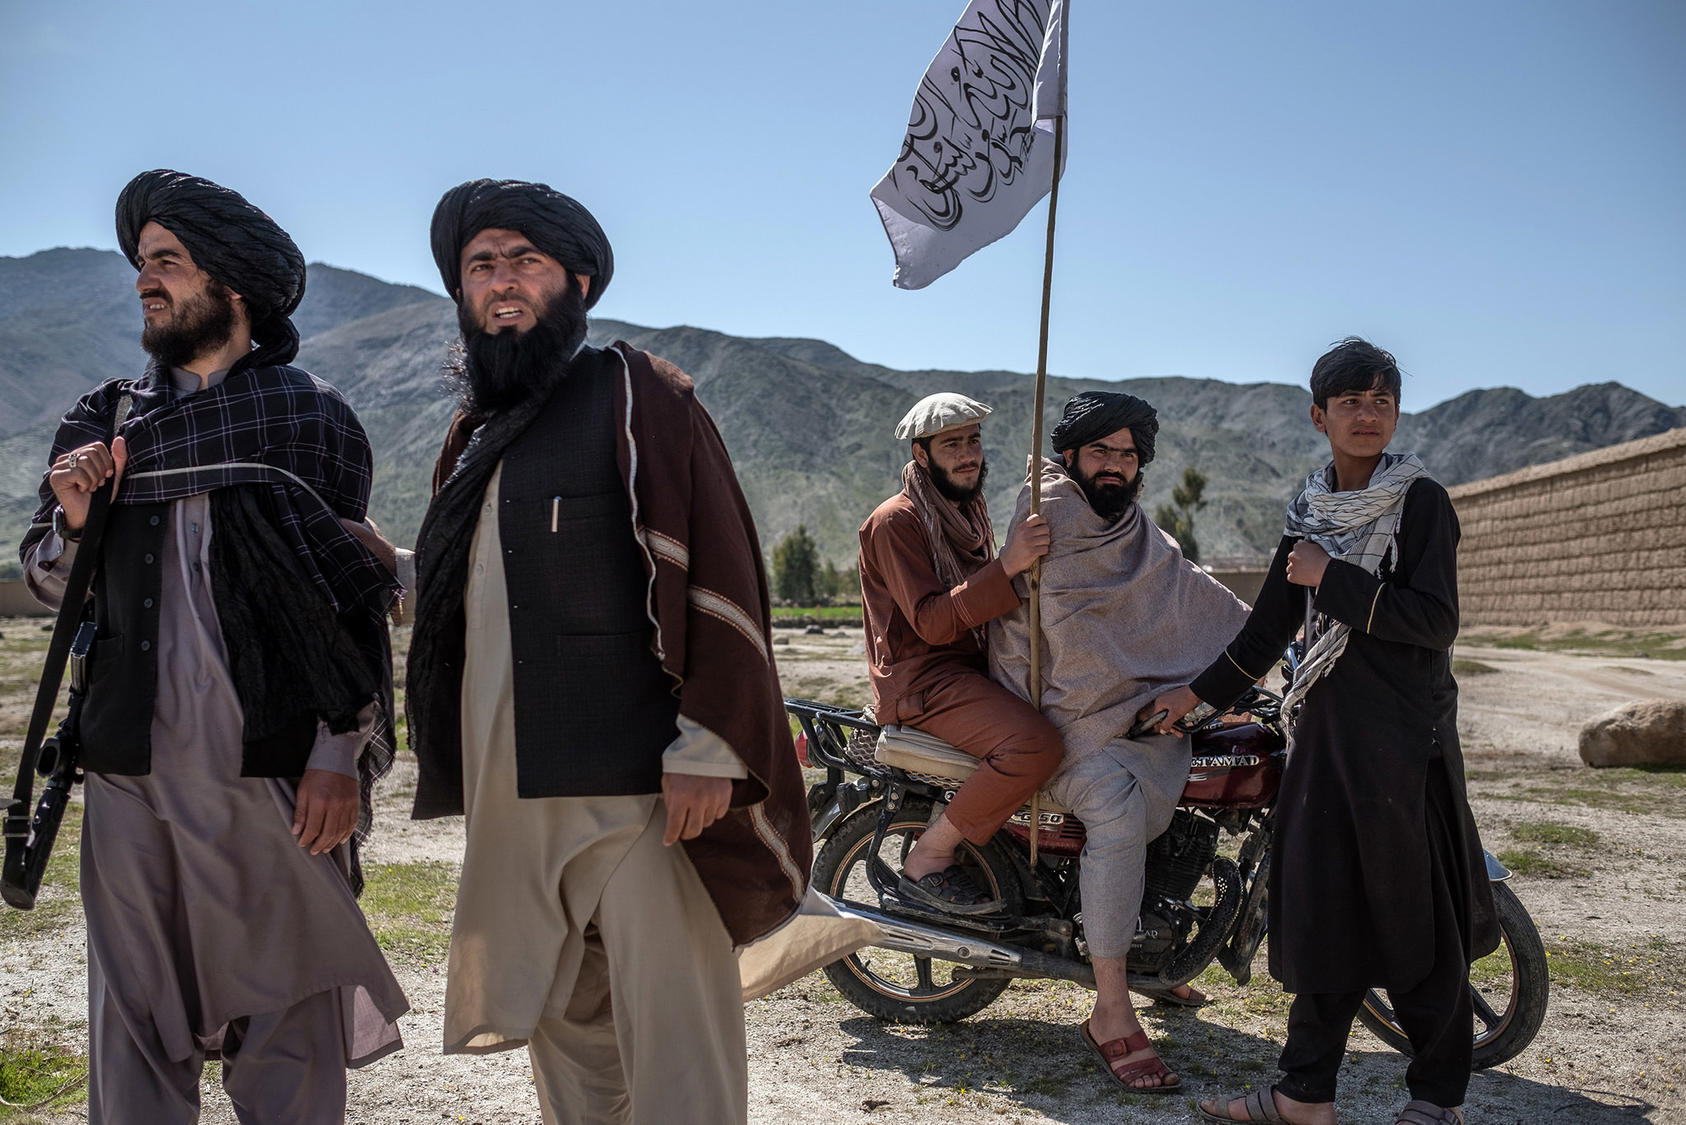 Taliban fighters in Laghman, Afghanistan on March 13, 2020. Central Asian states hope they can incentivize the group and the Afghan government to make peace for the benefit of the region. (Jim Huylebroek/The New York Times)